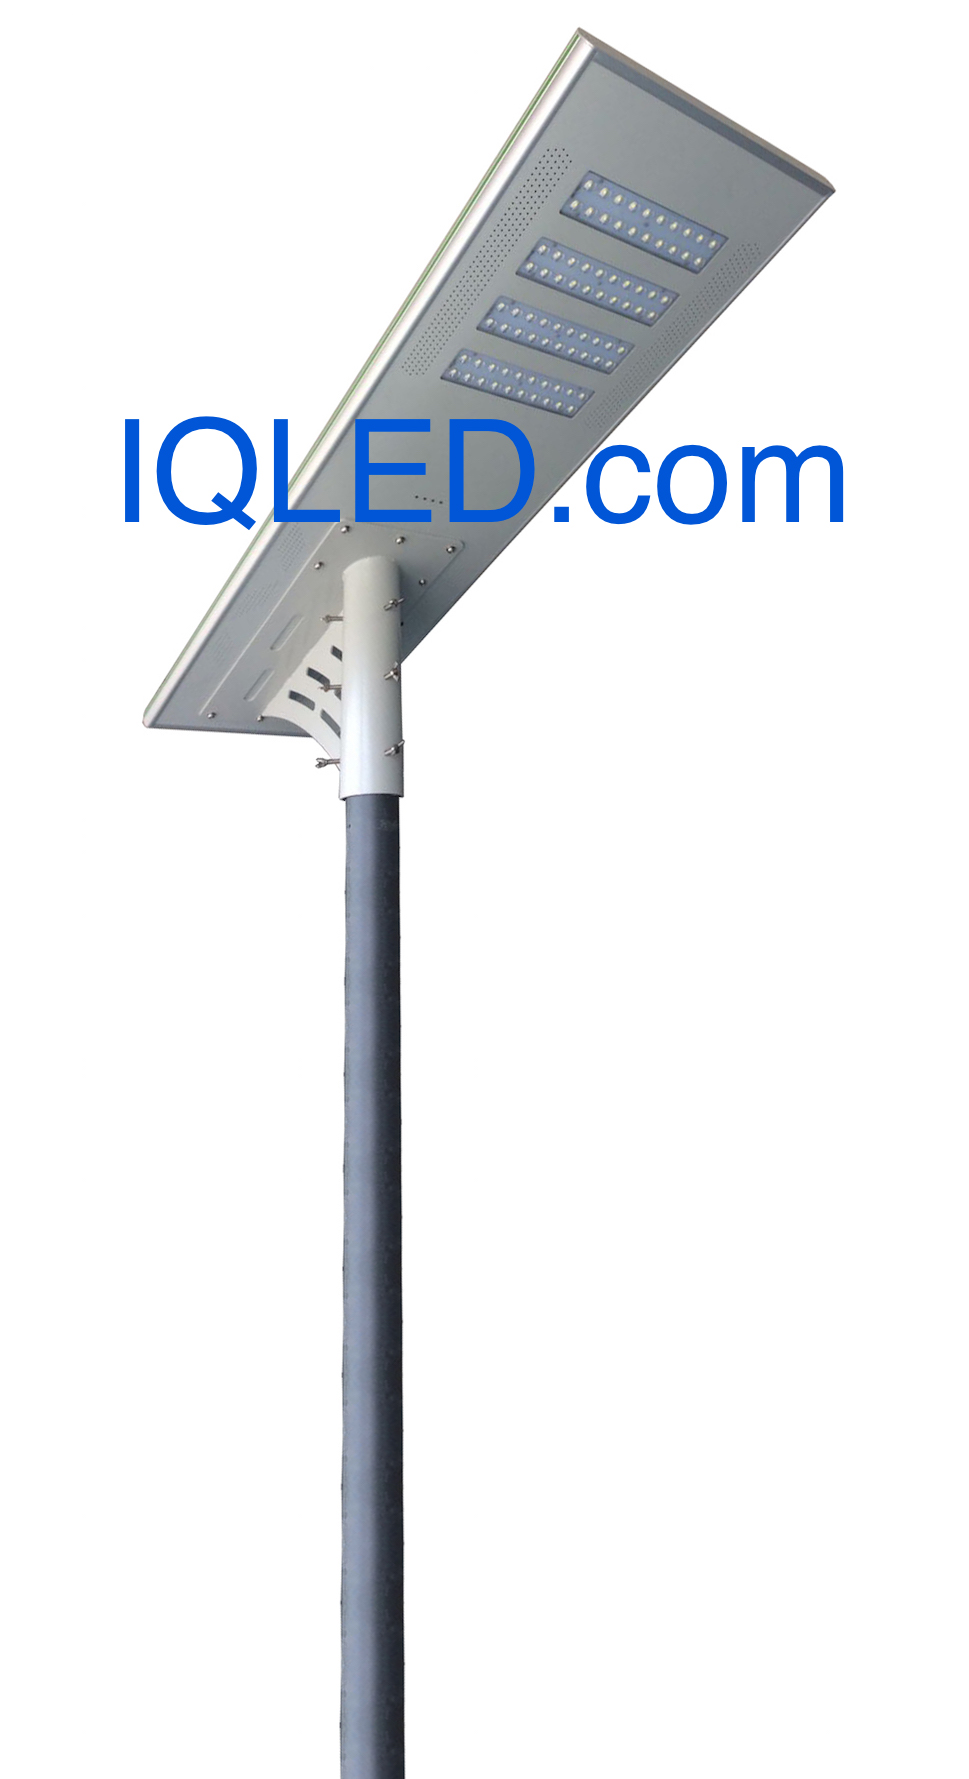 Solar Parking Lot Lights, Solar Parking Lot Lighting Self Contained, Solar Powered Led Lighting System, Solar Street Lighting, Solar Light LED Integrated, Solar Security Lighting, Solar Perimeter Security Lighting, Airport Security Lighting Solar, Bridge Light Solar Powered, Solar Airport Parking Lot Lighting, Solar Light LED Integrated